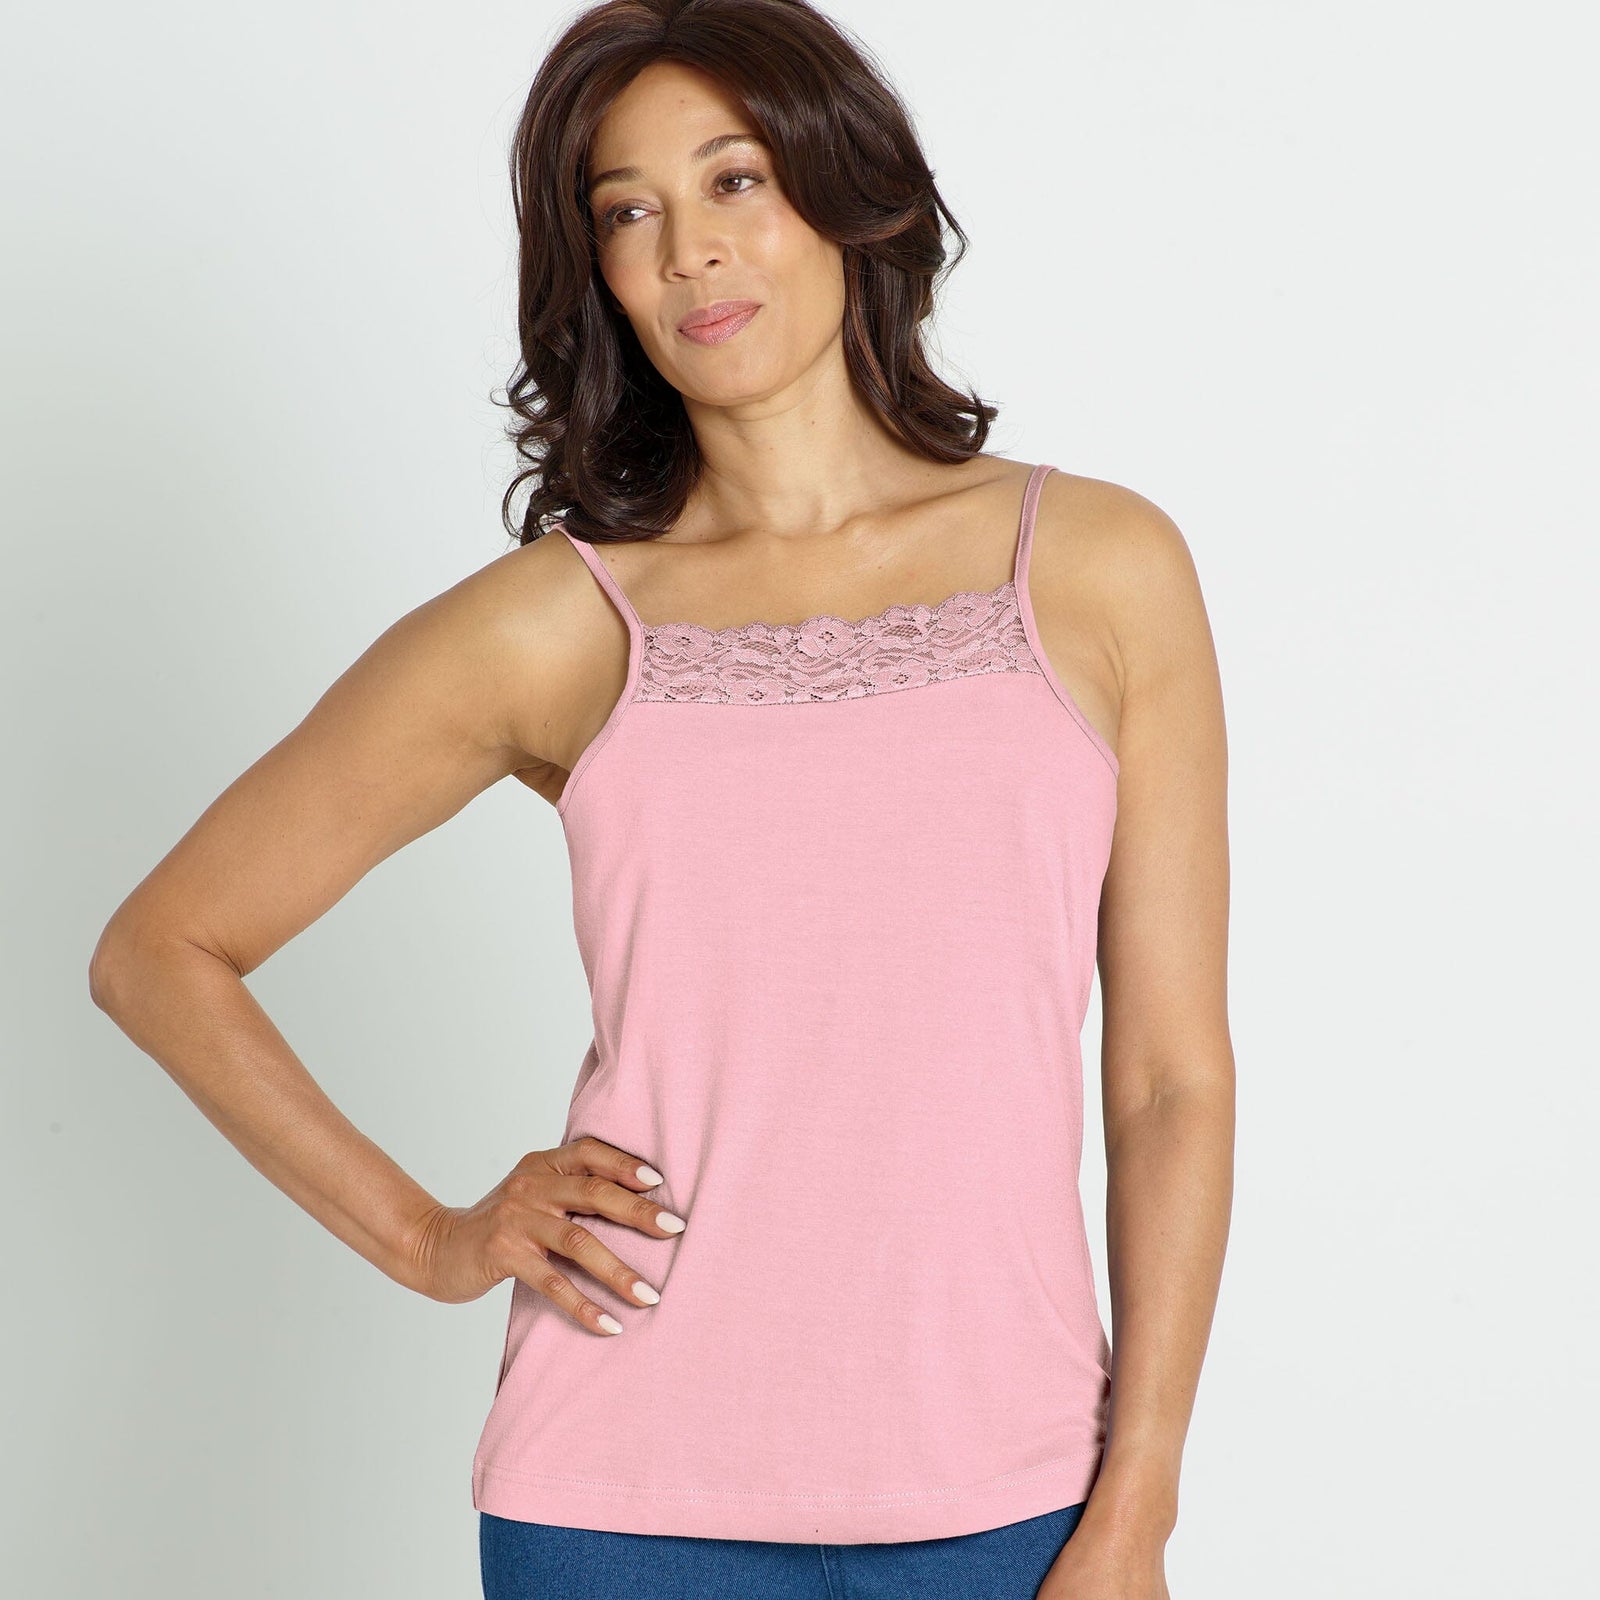 Mastectomy Camisoles, Post Surgery Tops, Wraps & Rompers